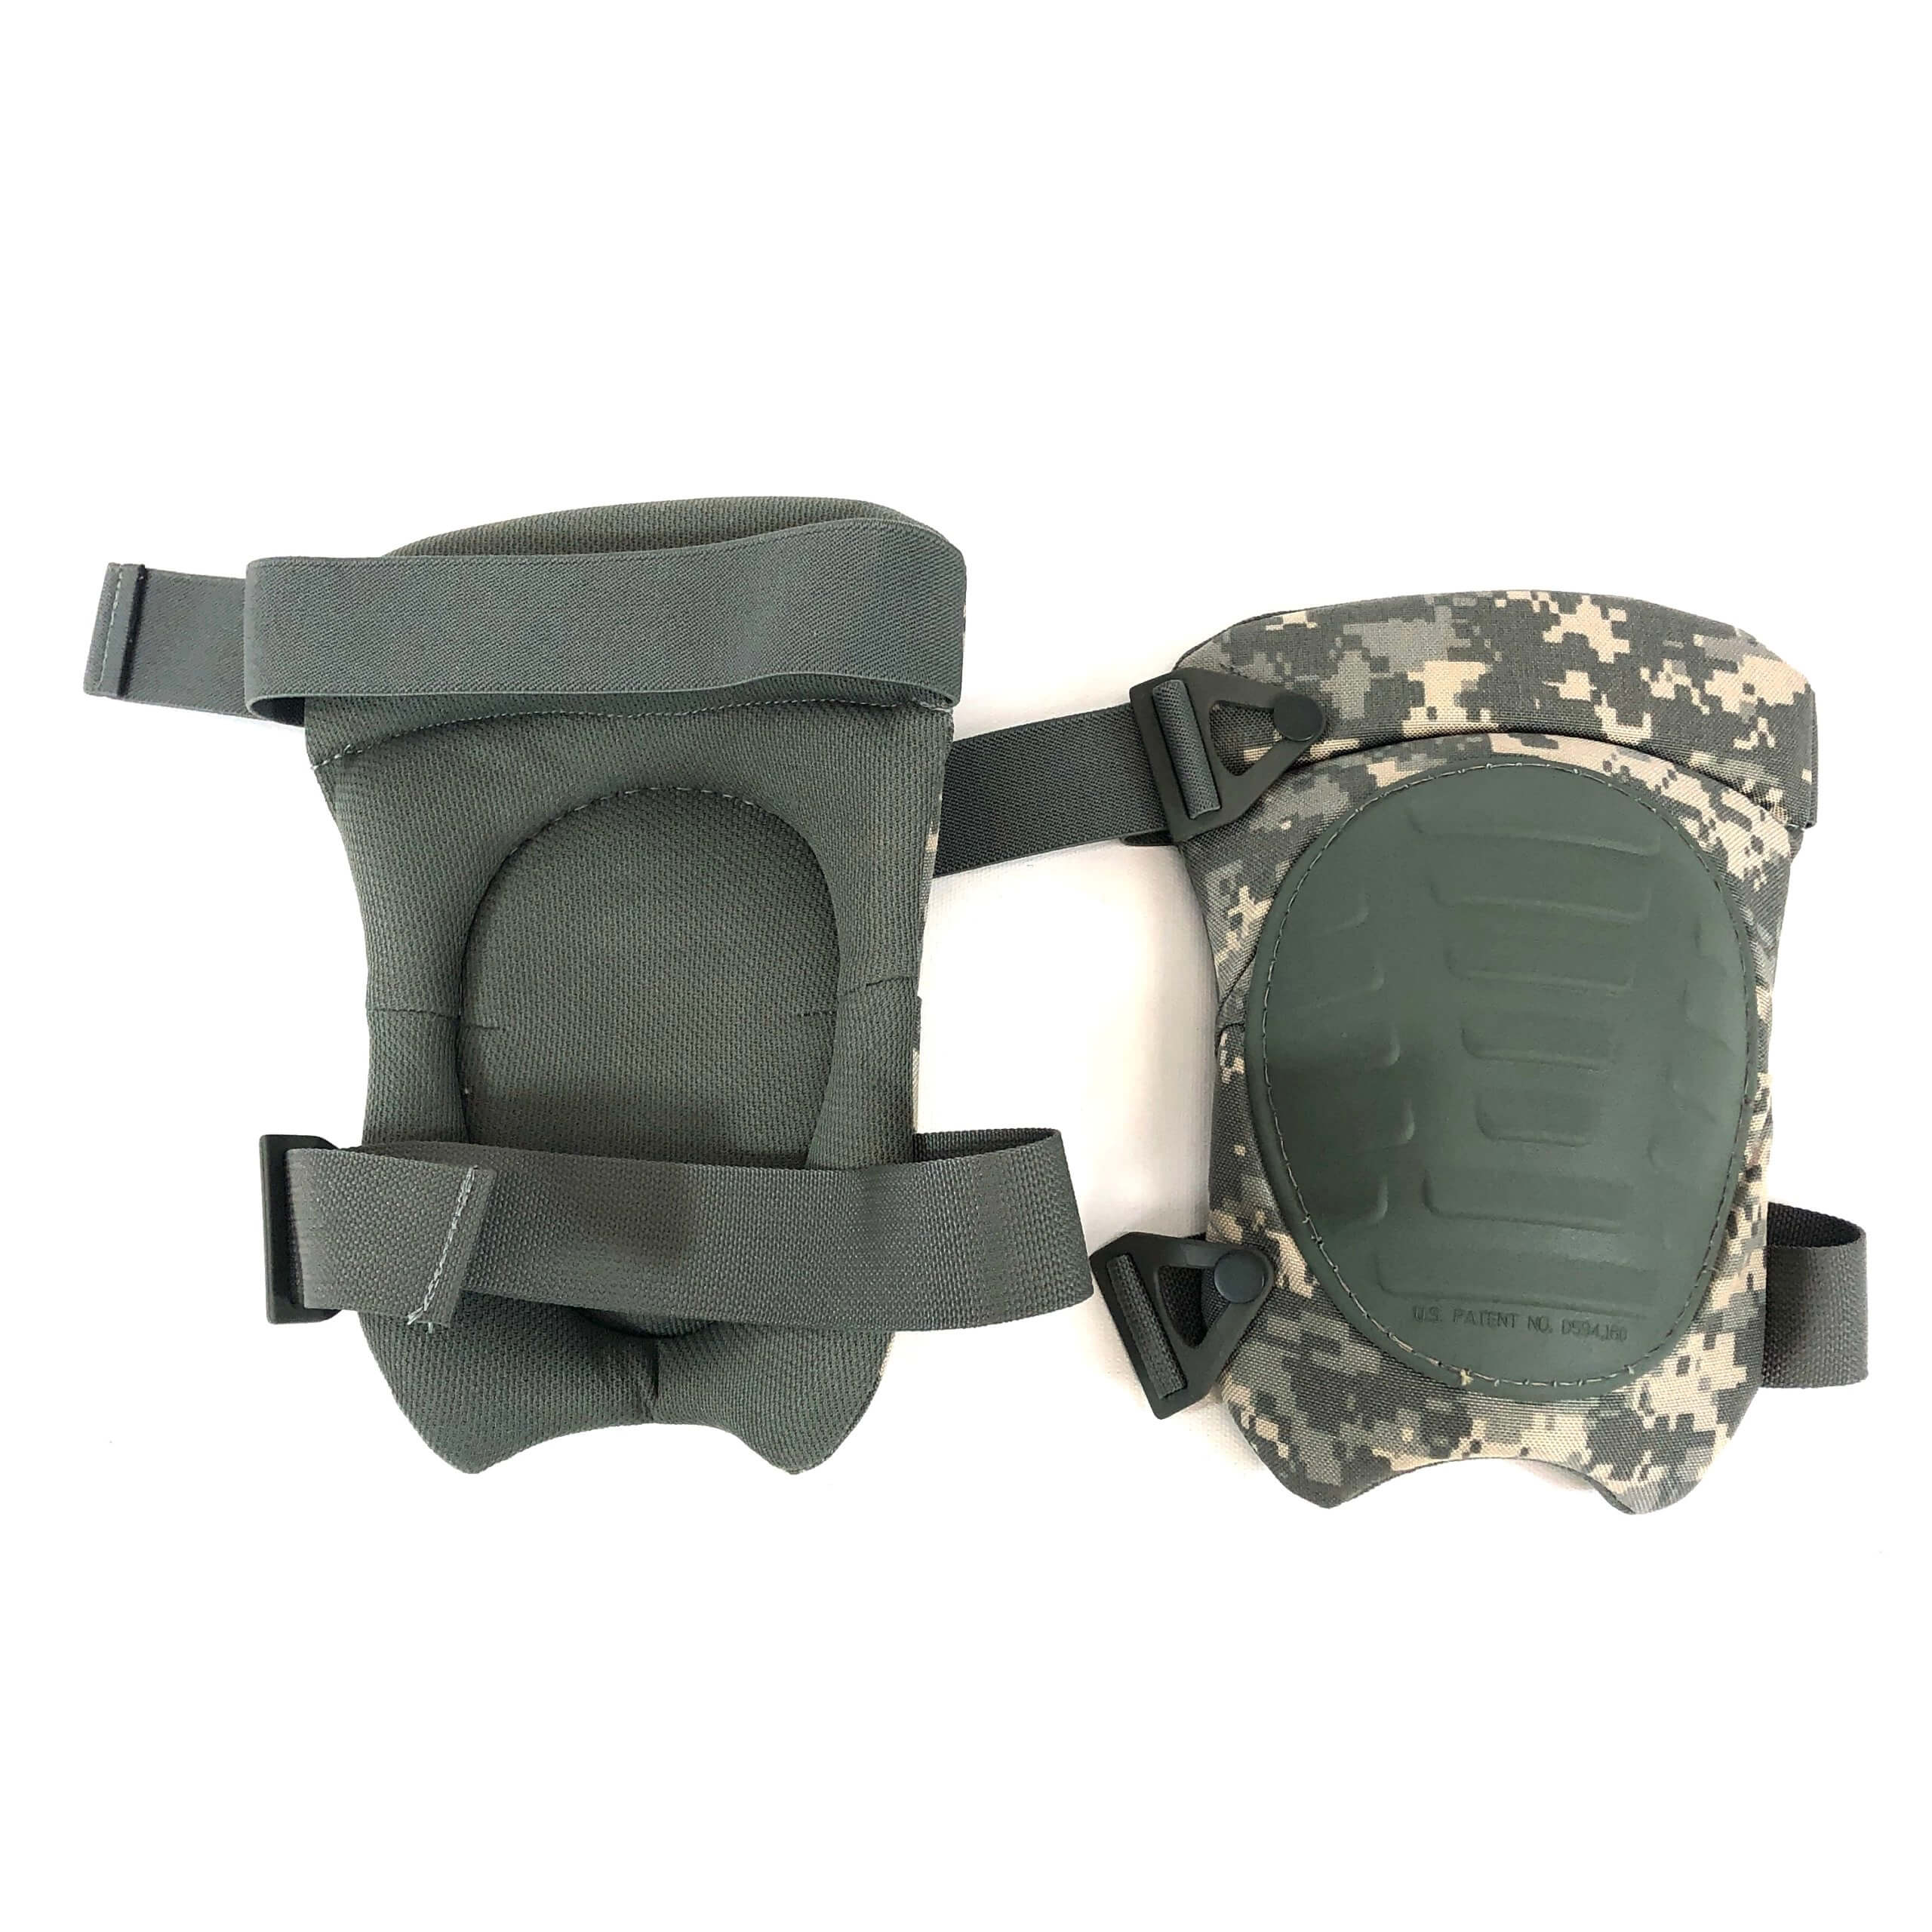 VGC UCP US MILITARY Mcguire-Nicholas ELBOW PADS ONE SIZE FITS ALL ACU PATTERN 